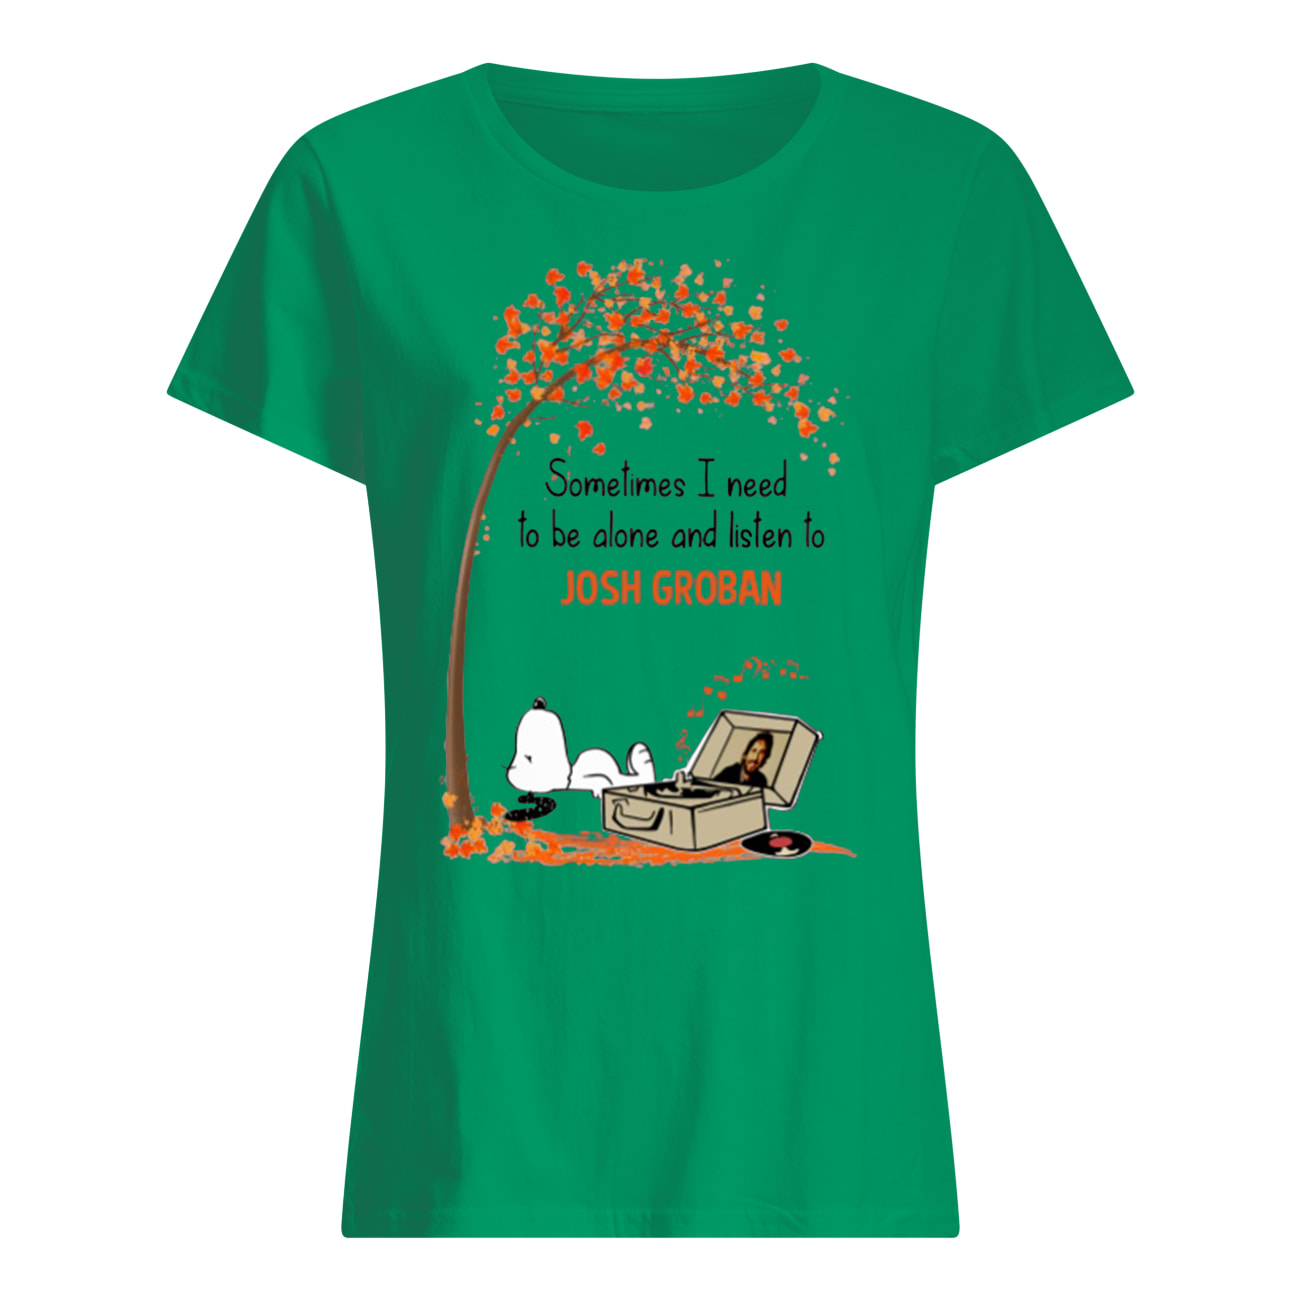 Snoopy sometimes I need to be alone and listen to josh groban women's shirt